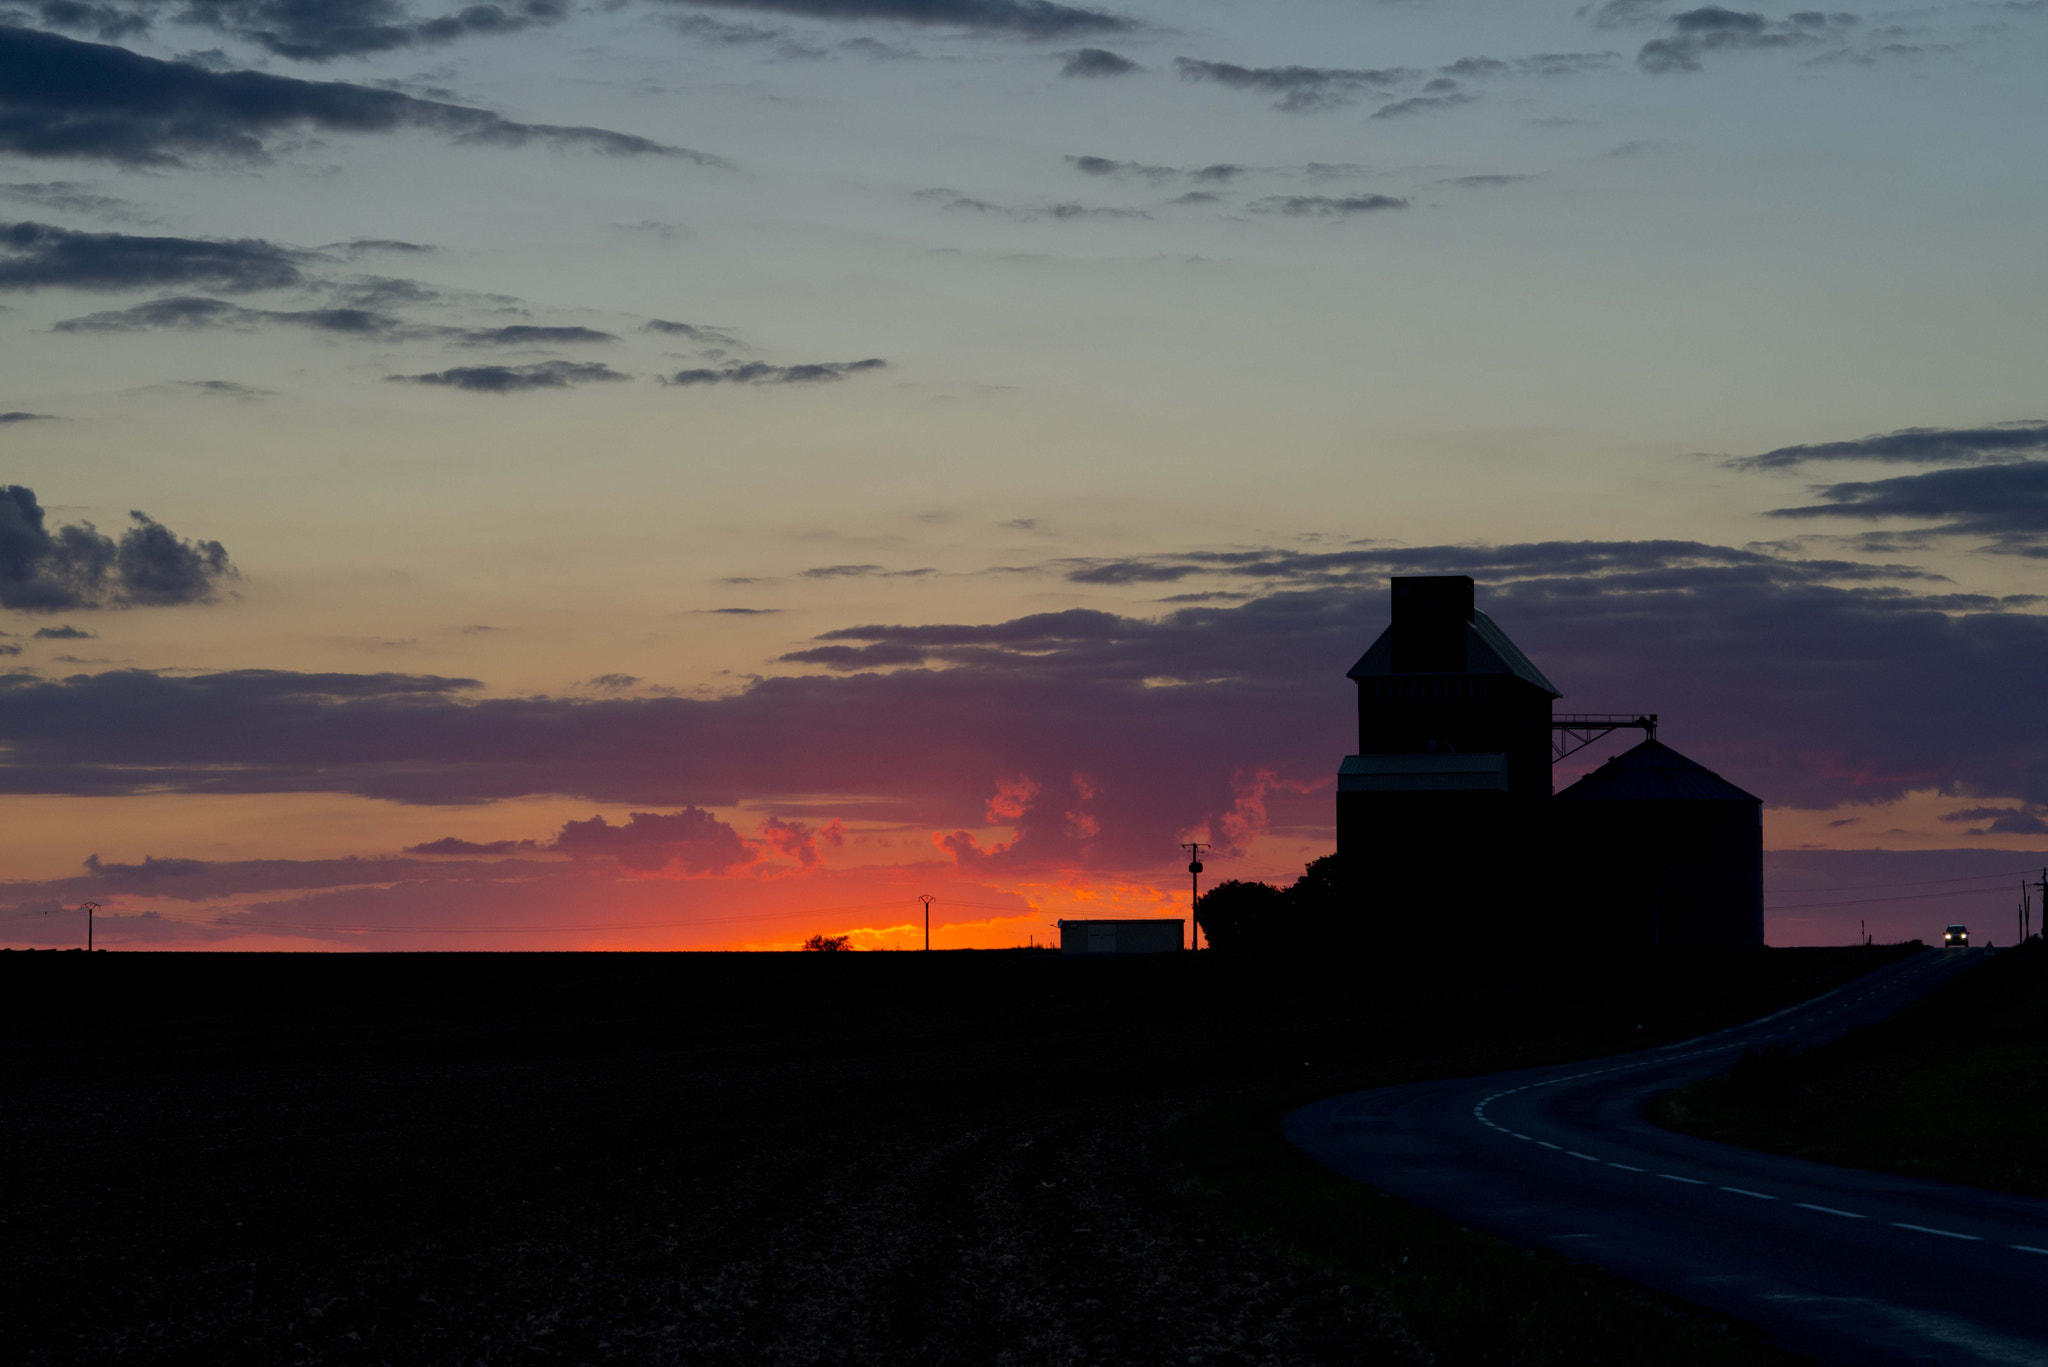 Nikon D800E sample photo. Sunset angenay, france. got lucky with the car and headlights photography